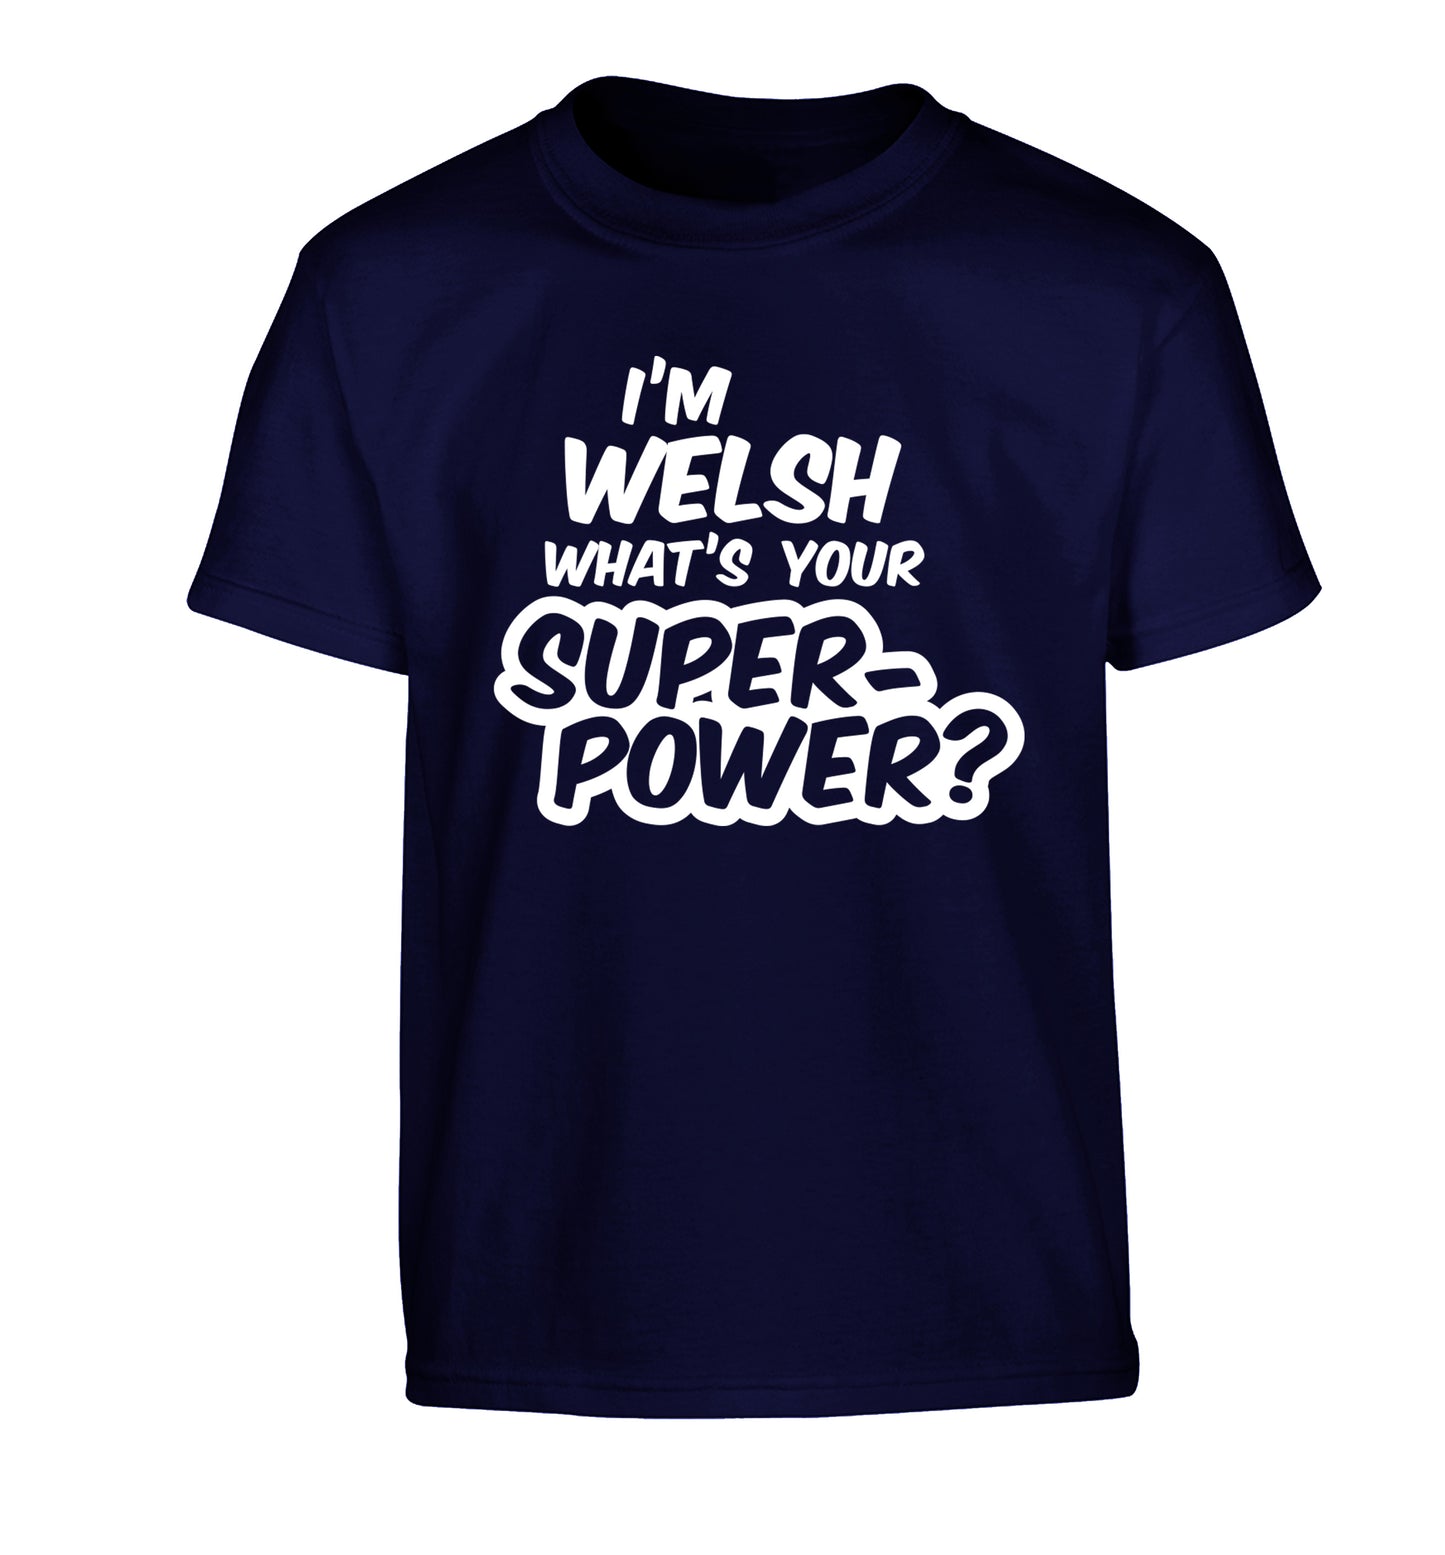 I'm Welsh what's your superpower? Children's navy Tshirt 12-13 Years